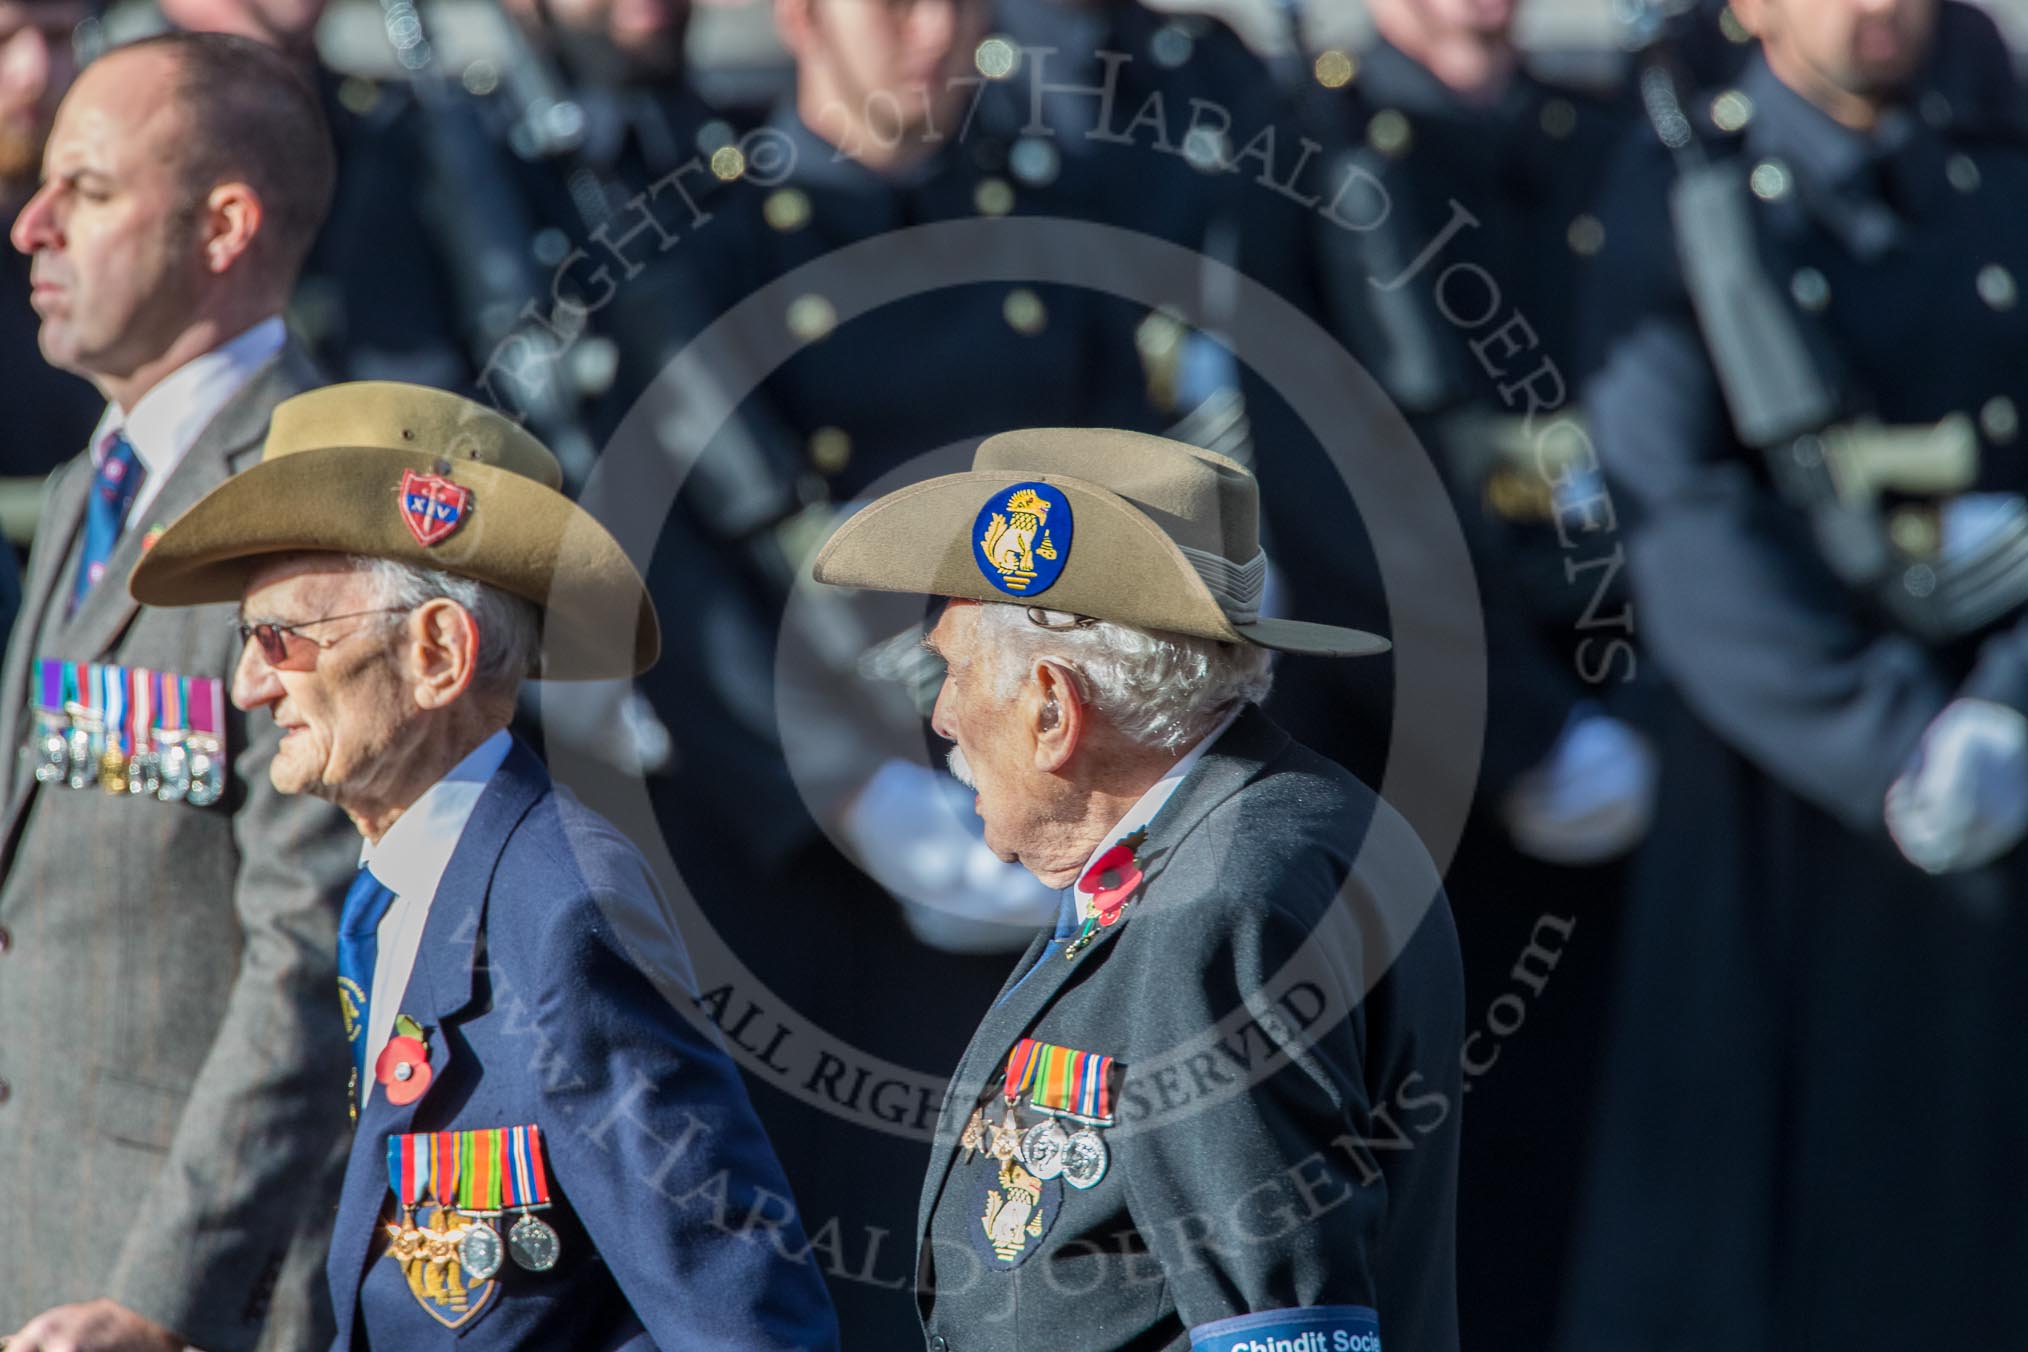 Canadian Veterans Association, UK (Group F19, 10 members) during the Royal British Legion March Past on Remembrance Sunday at the Cenotaph, Whitehall, Westminster, London, 11 November 2018, 11:53.